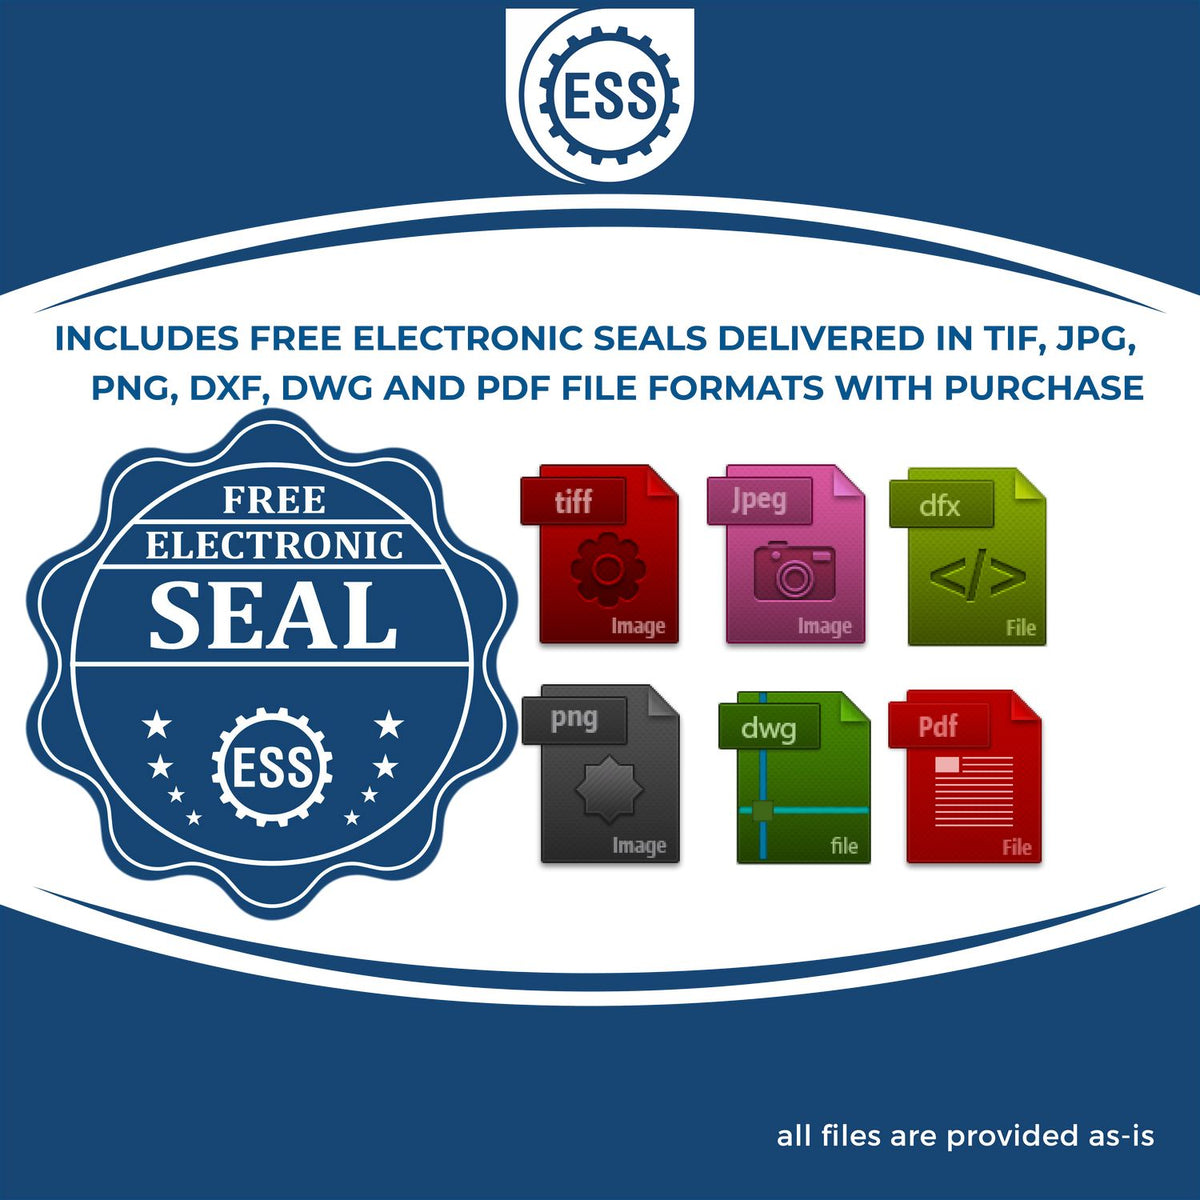 An infographic for the free electronic seal for the Long Reach Kansas Land Surveyor Seal illustrating the different file type icons such as DXF, DWG, TIF, JPG and PNG.